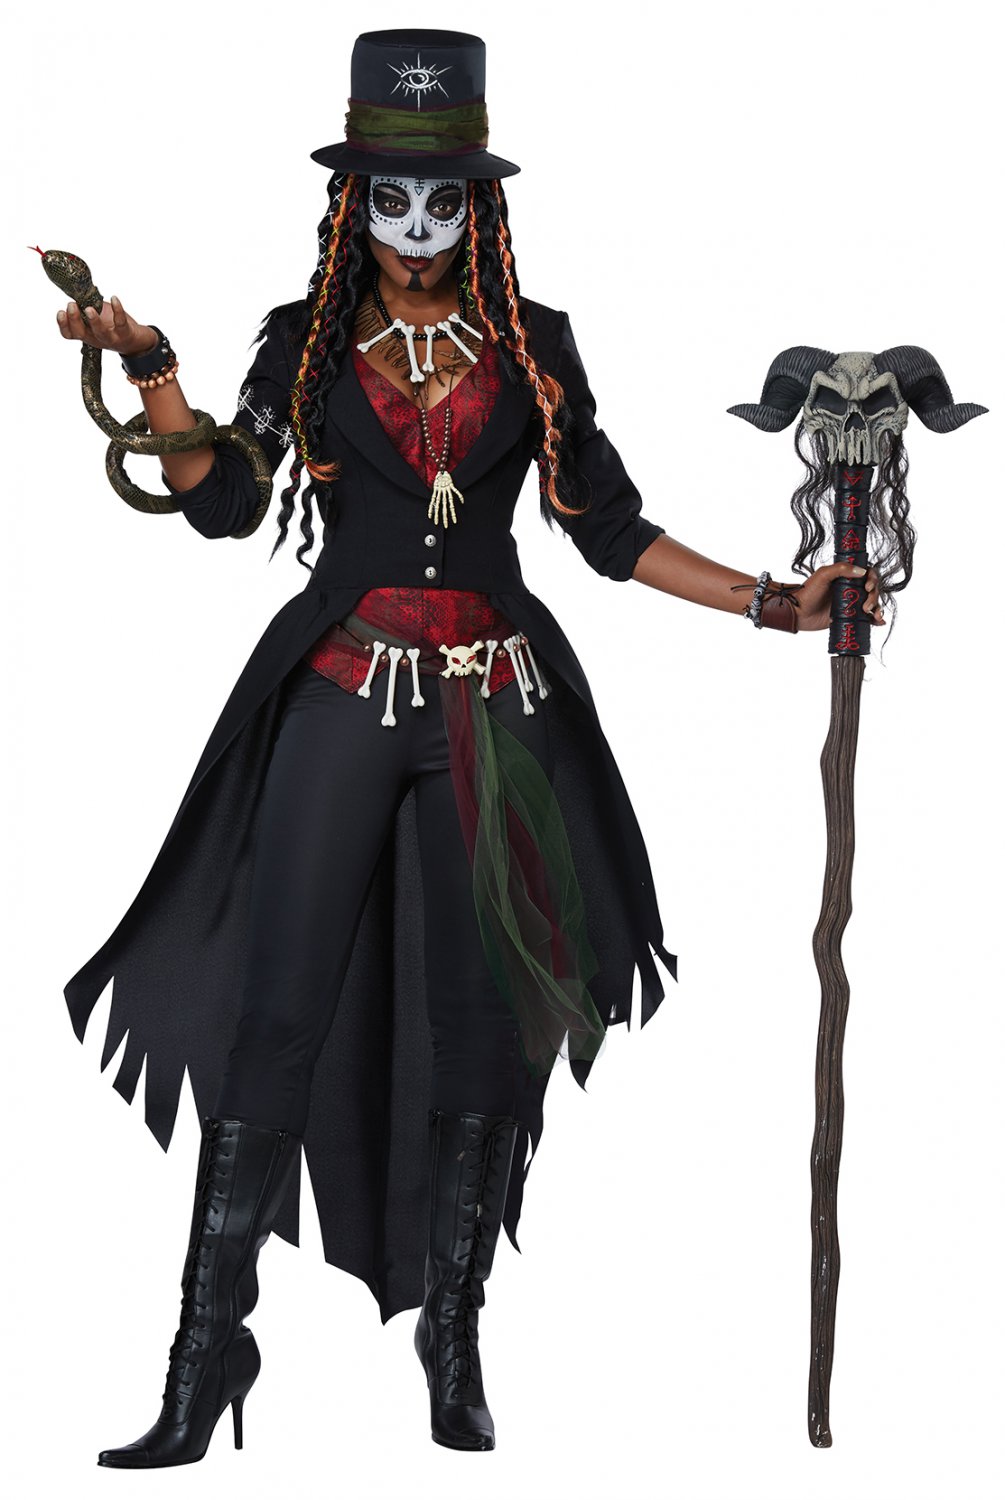 Size: X-Small #01432 Wizard Gothic Voodoo Magic Adult Costume